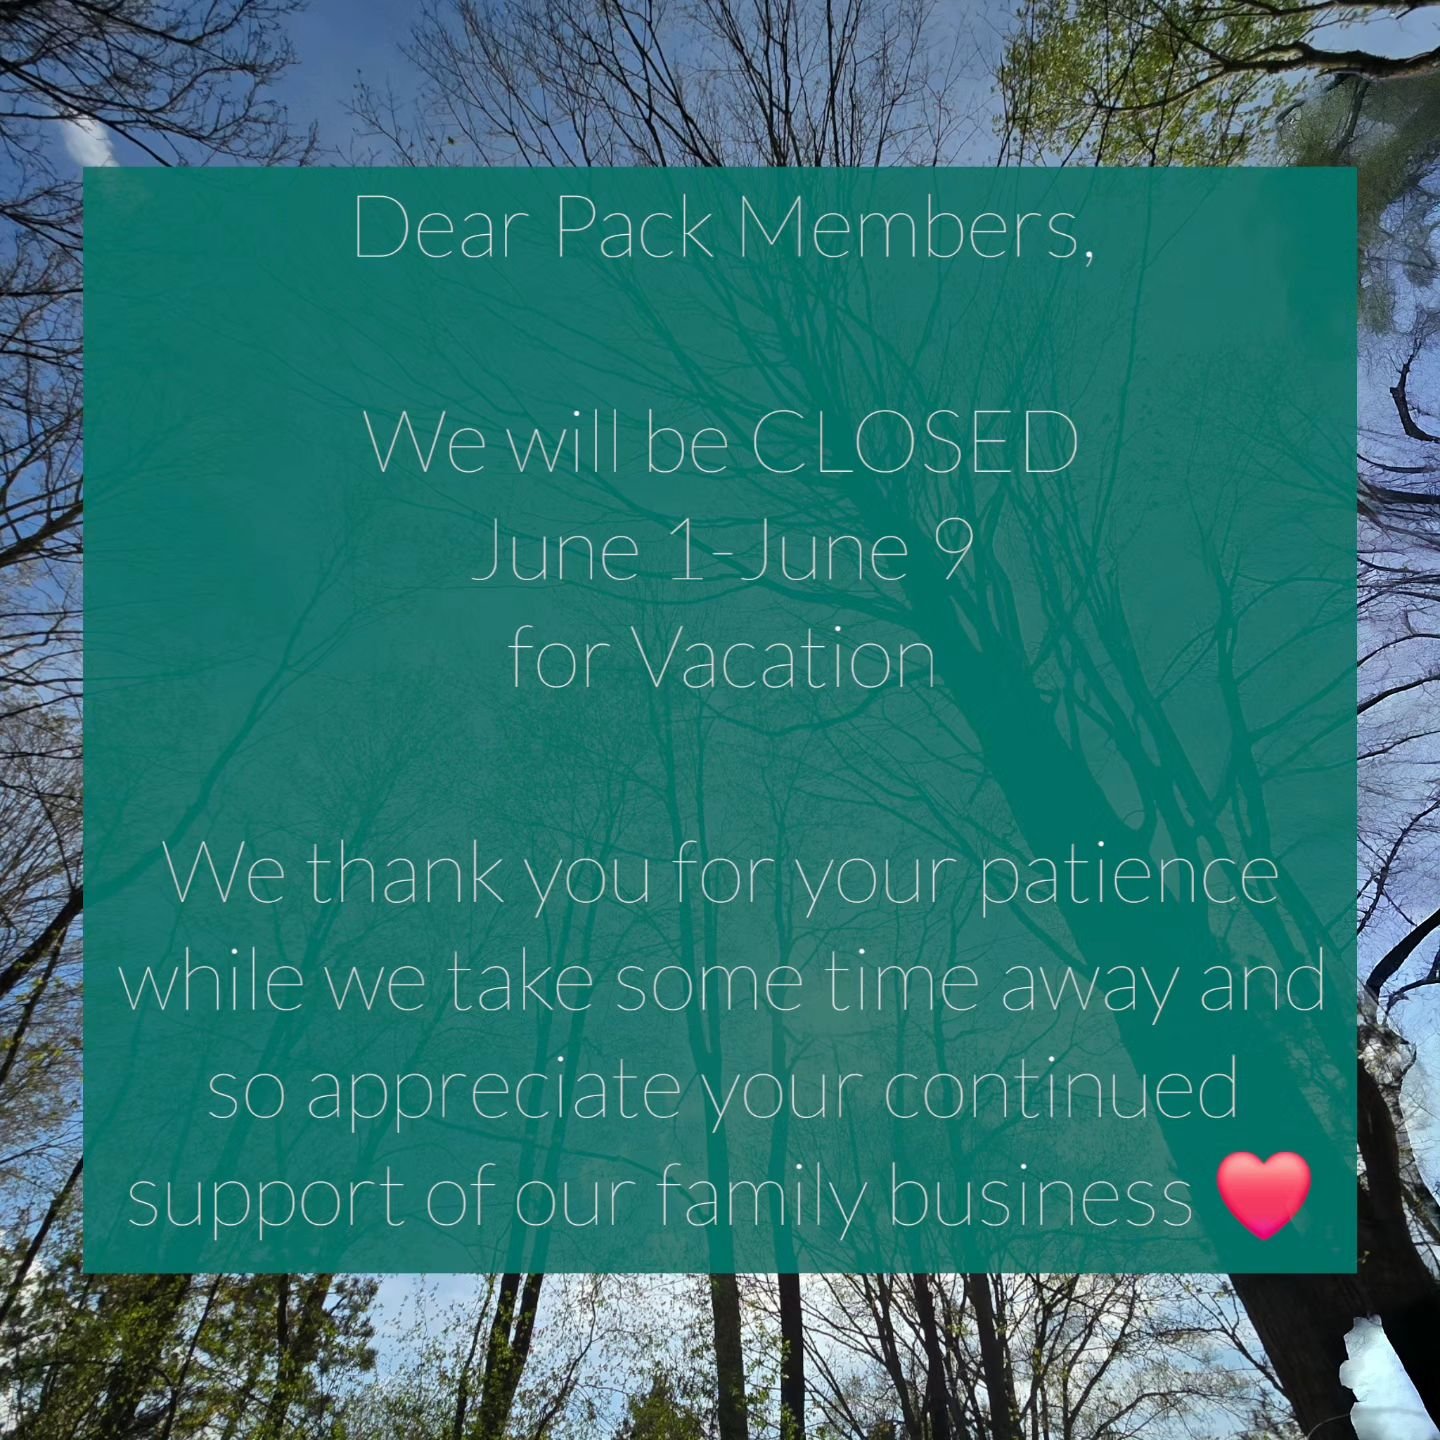 🐾🍃Dear Pack Playtime members🍃🐾

During the week of June 1st to June 9th, Pack Playtime will be CLOSED as our team will be taking a vacation to rest and recharge ✨️ We value your continued support of our family business and appreciate your patienc